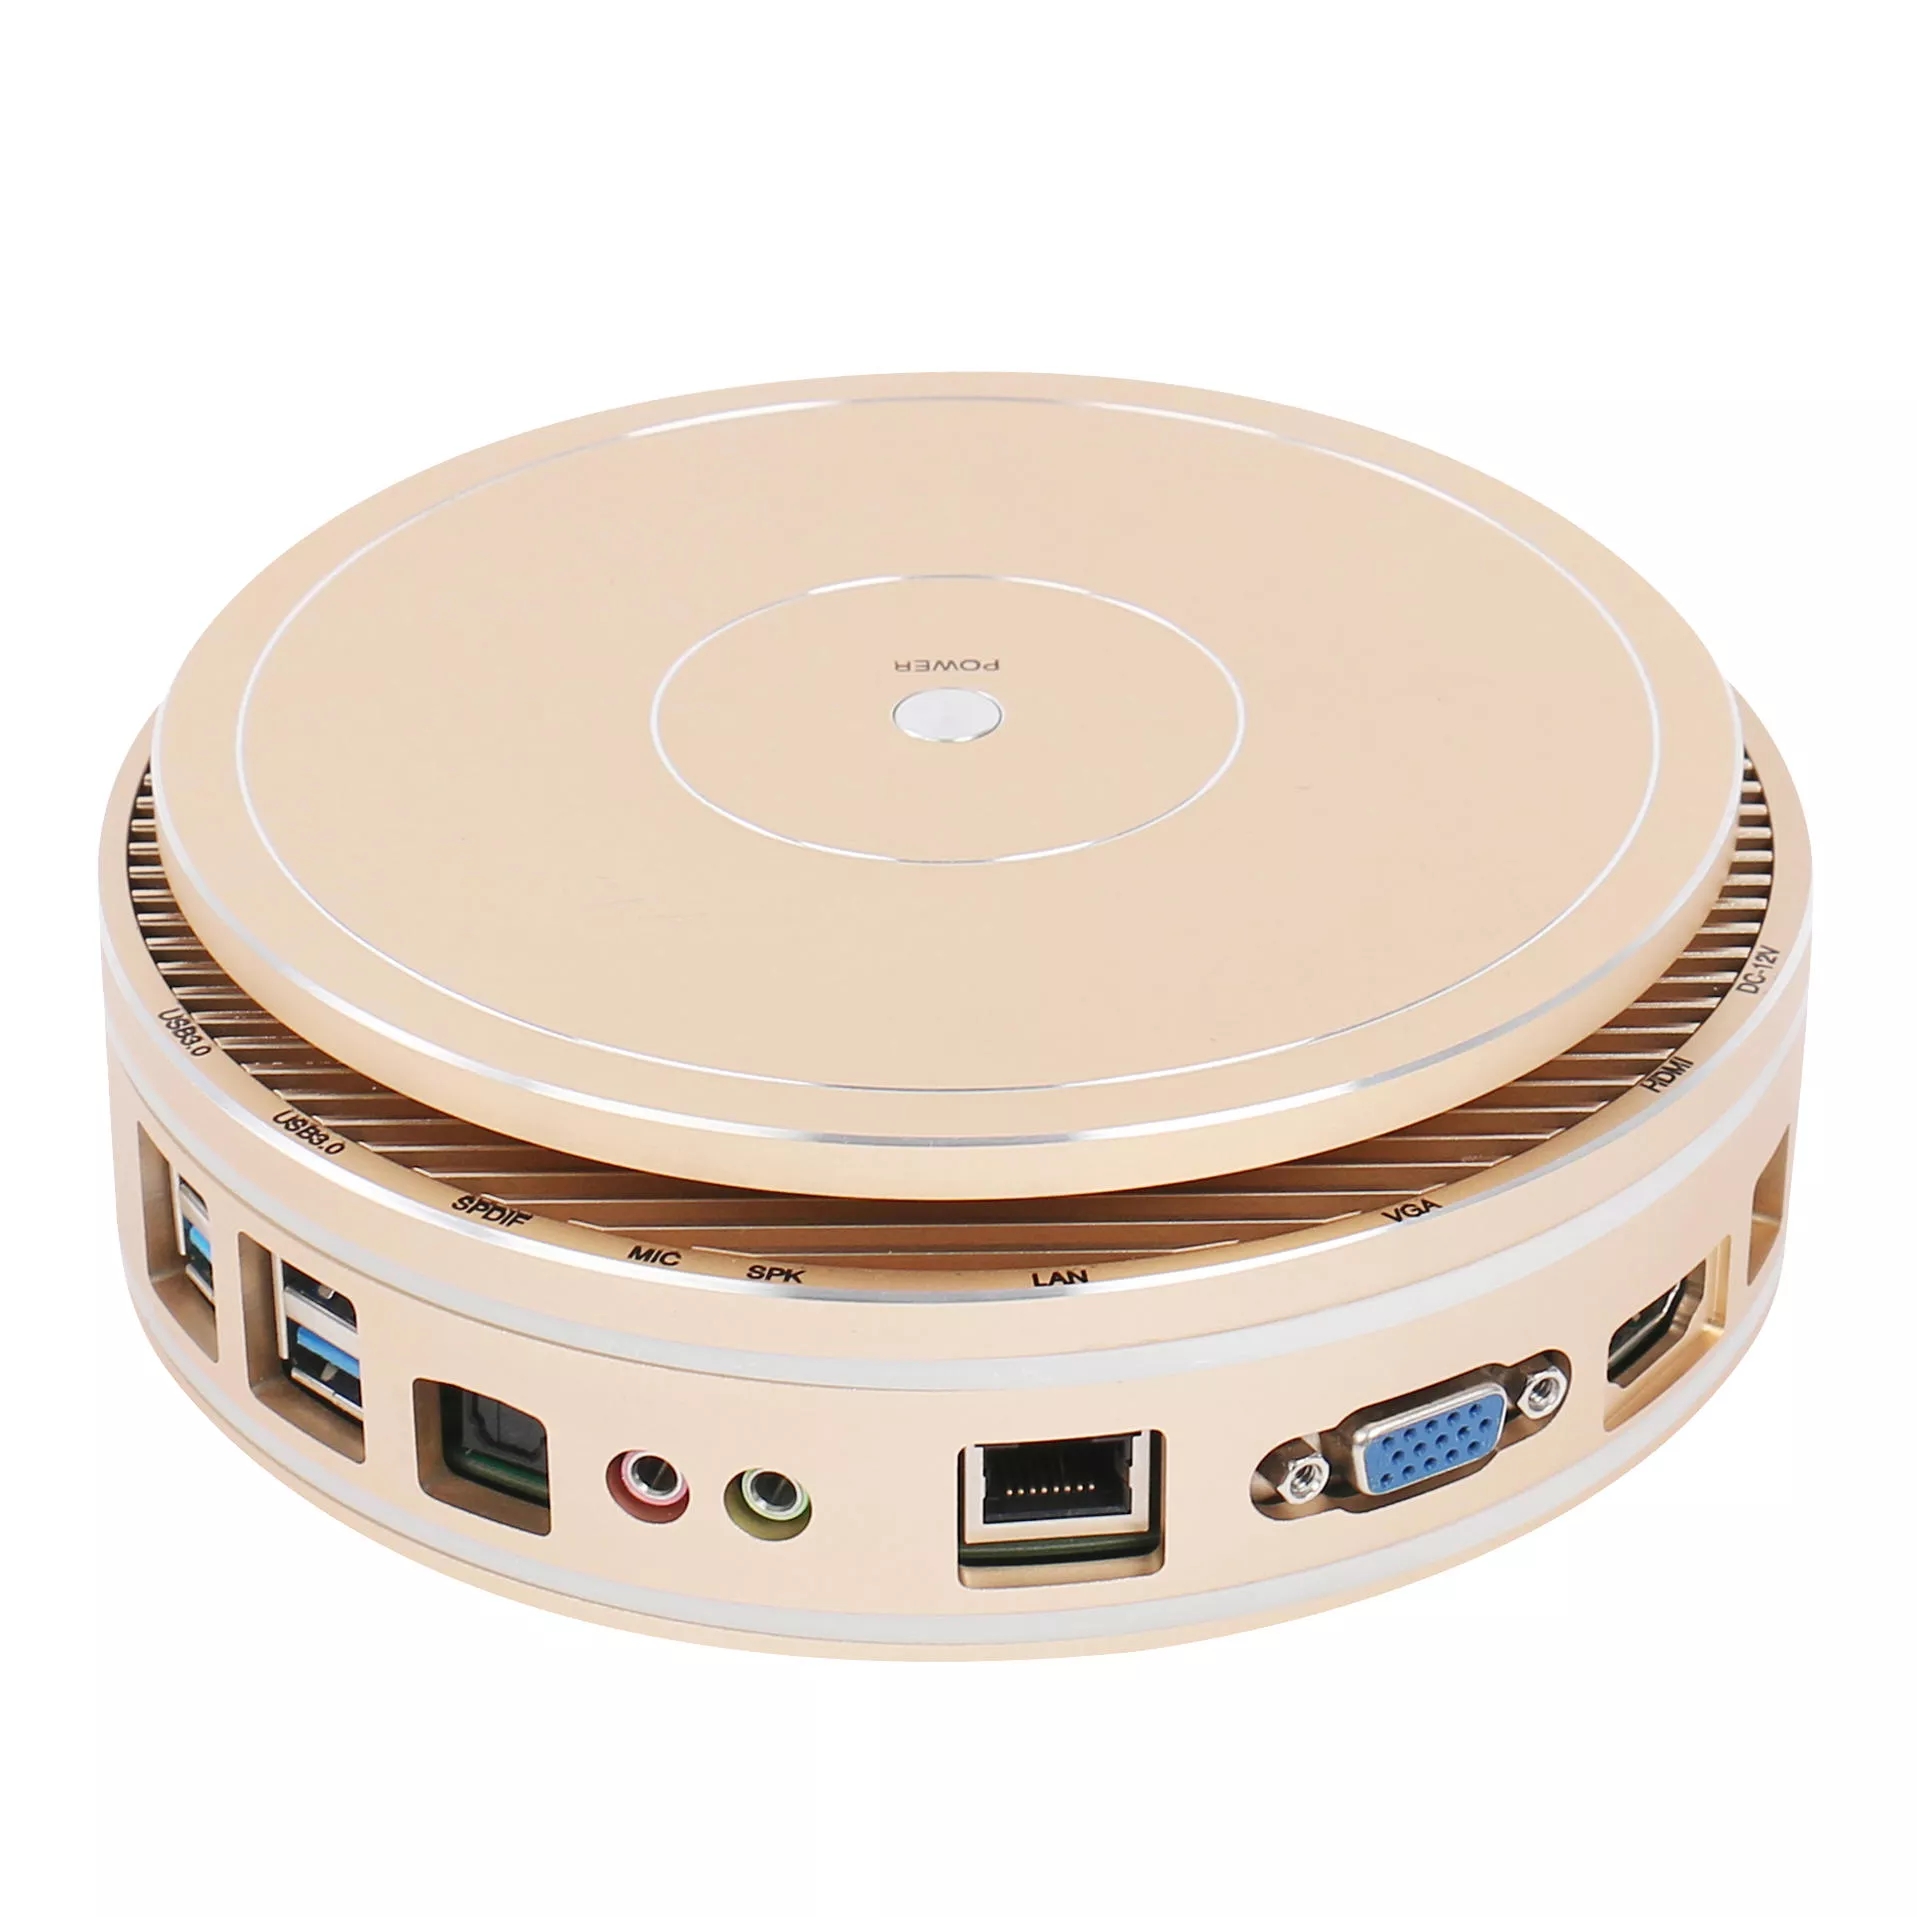 

XCY X36 Mini PC Intel i5 4200u 8GB RAM 128GB/256GB/512GB SSD Dual Core 1.6GHz to 2.6GHz Intel HD Graphics 520Wifi mSAT